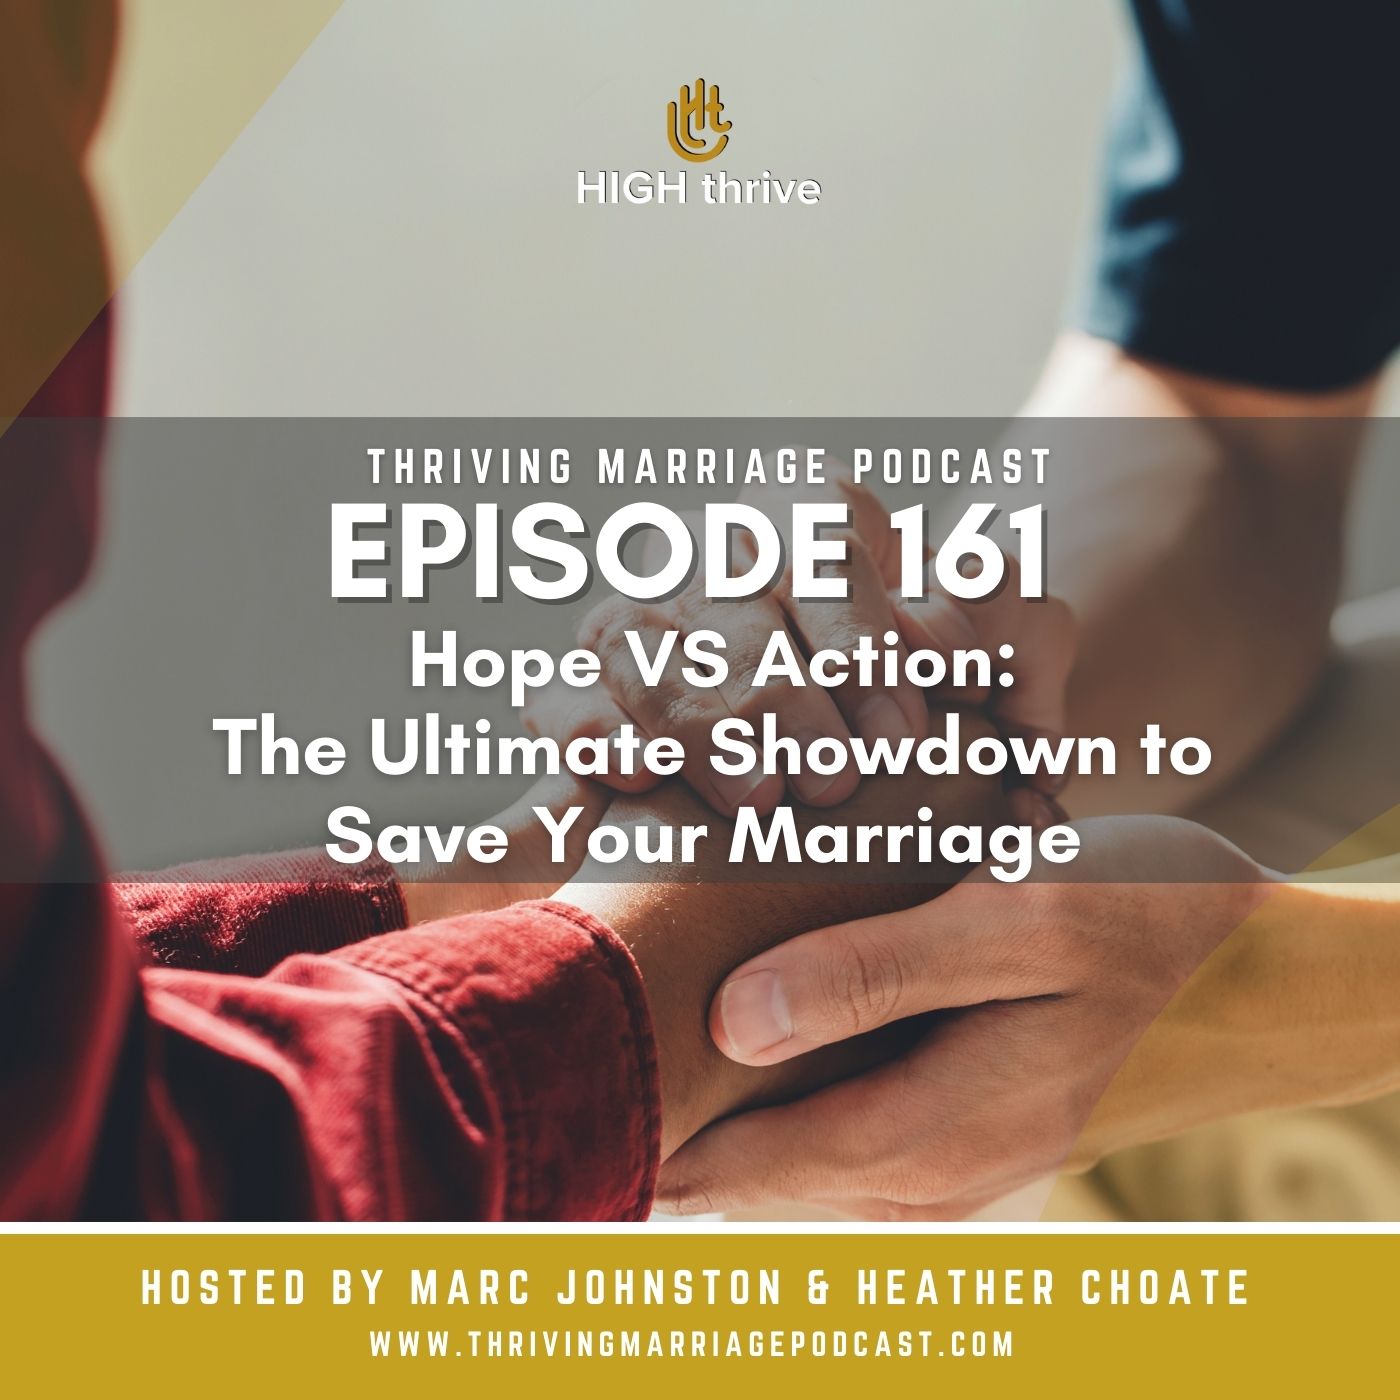 Episode 161: Hope VS Action: The Ultimate Showdown to Save Your Marriage